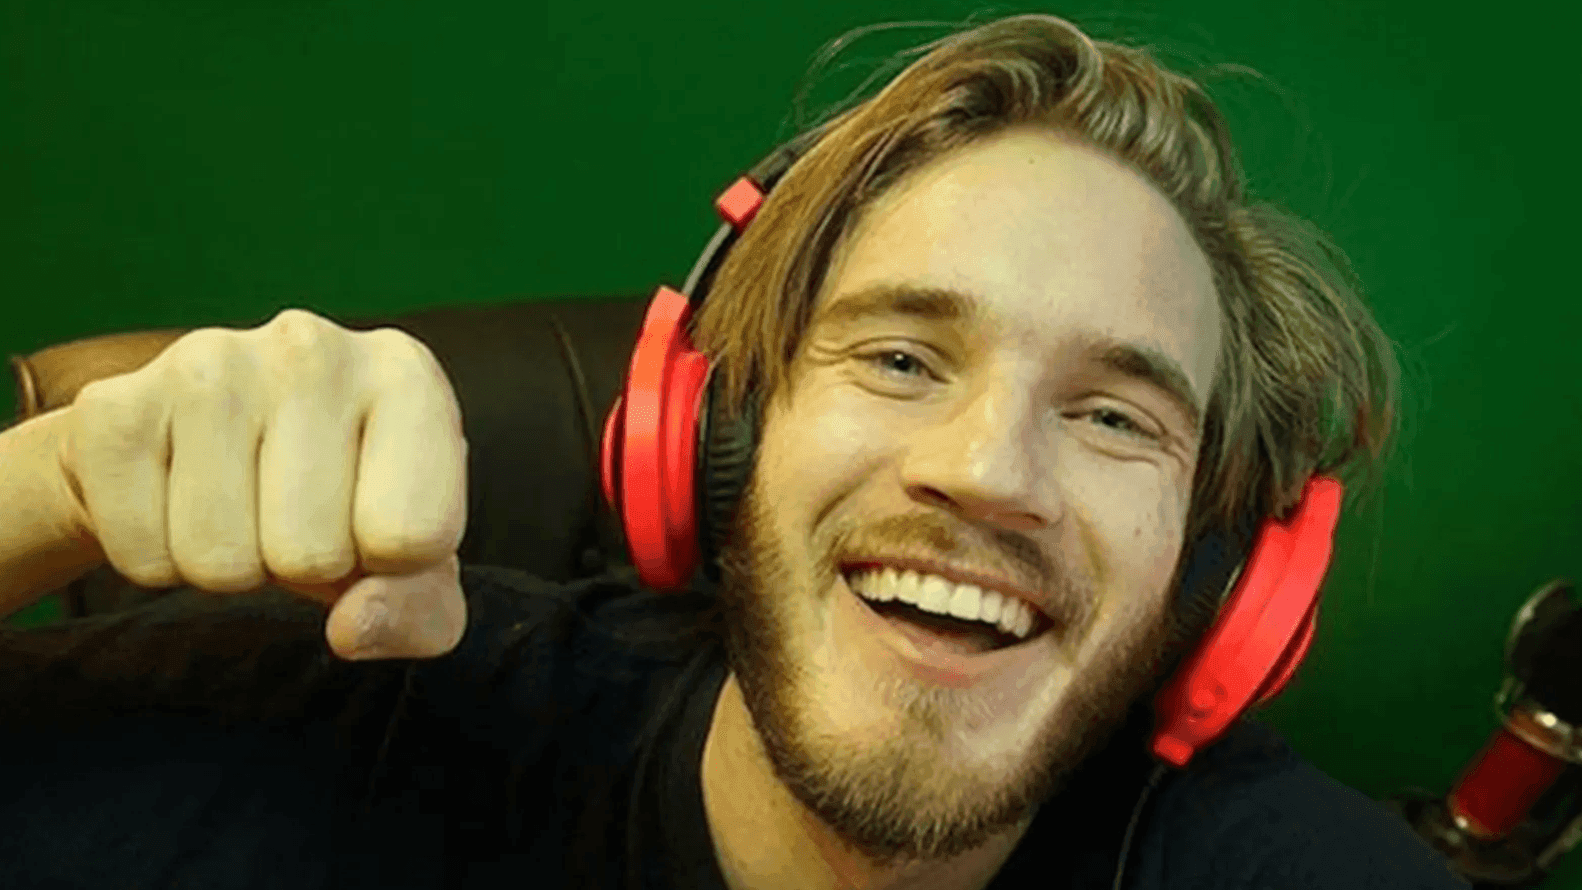 PewDiePie smiling looking for a fist bump from viewers